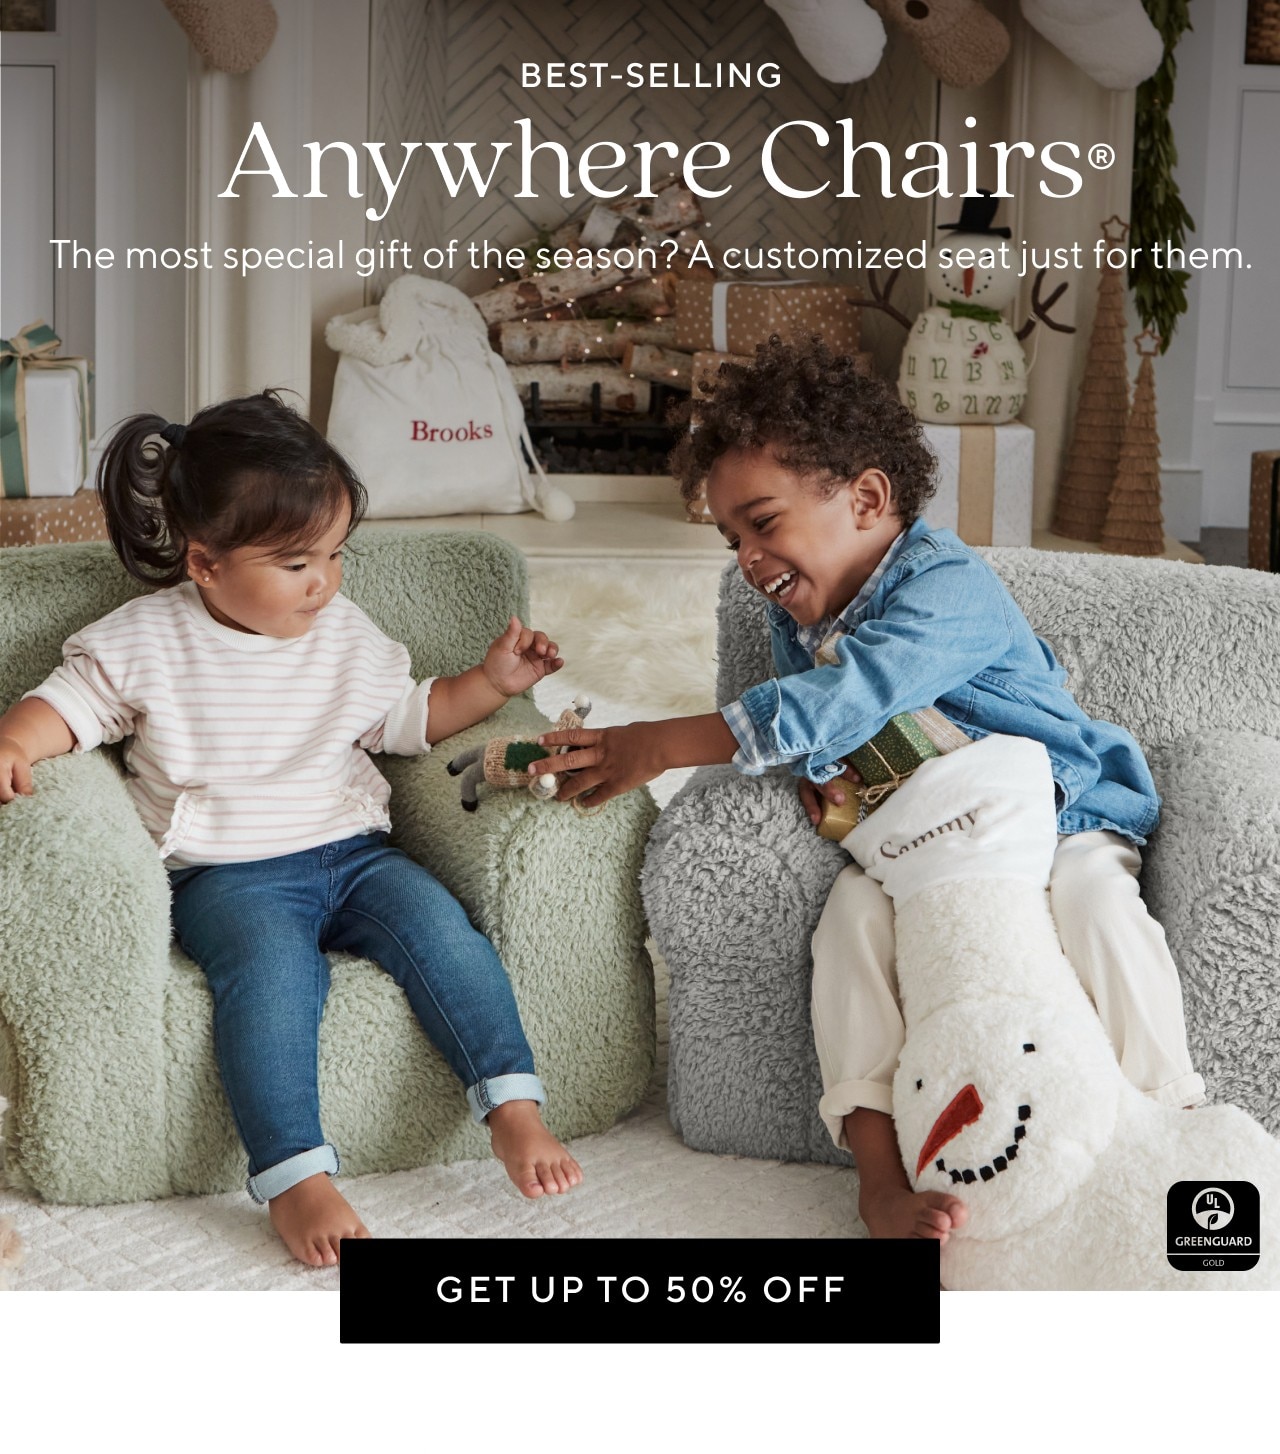 BEST SELLING - ANYWHERE CHAIRS - GET UP TO 50% OFF